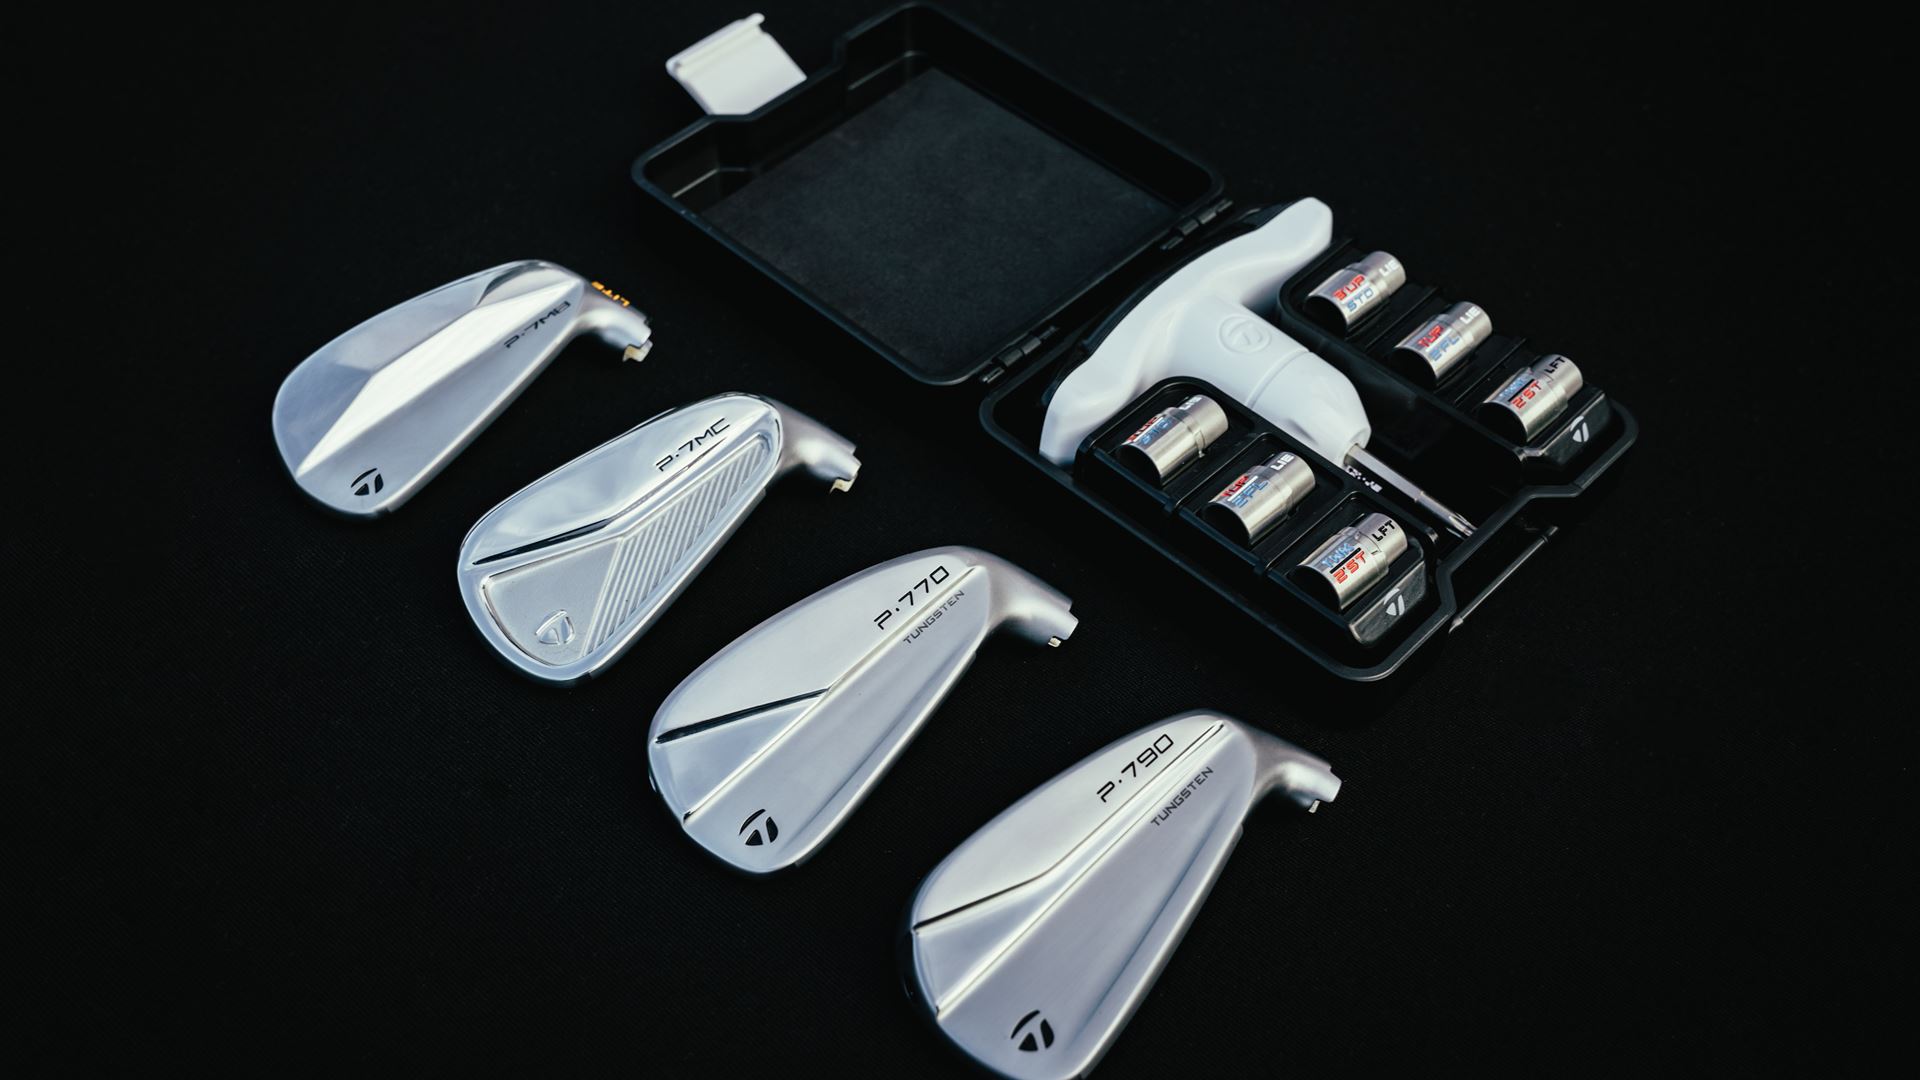 TaylorMade Golf Company Announces the All-New SelectFit Kit, A Revolutionary Custom Fitting Technology